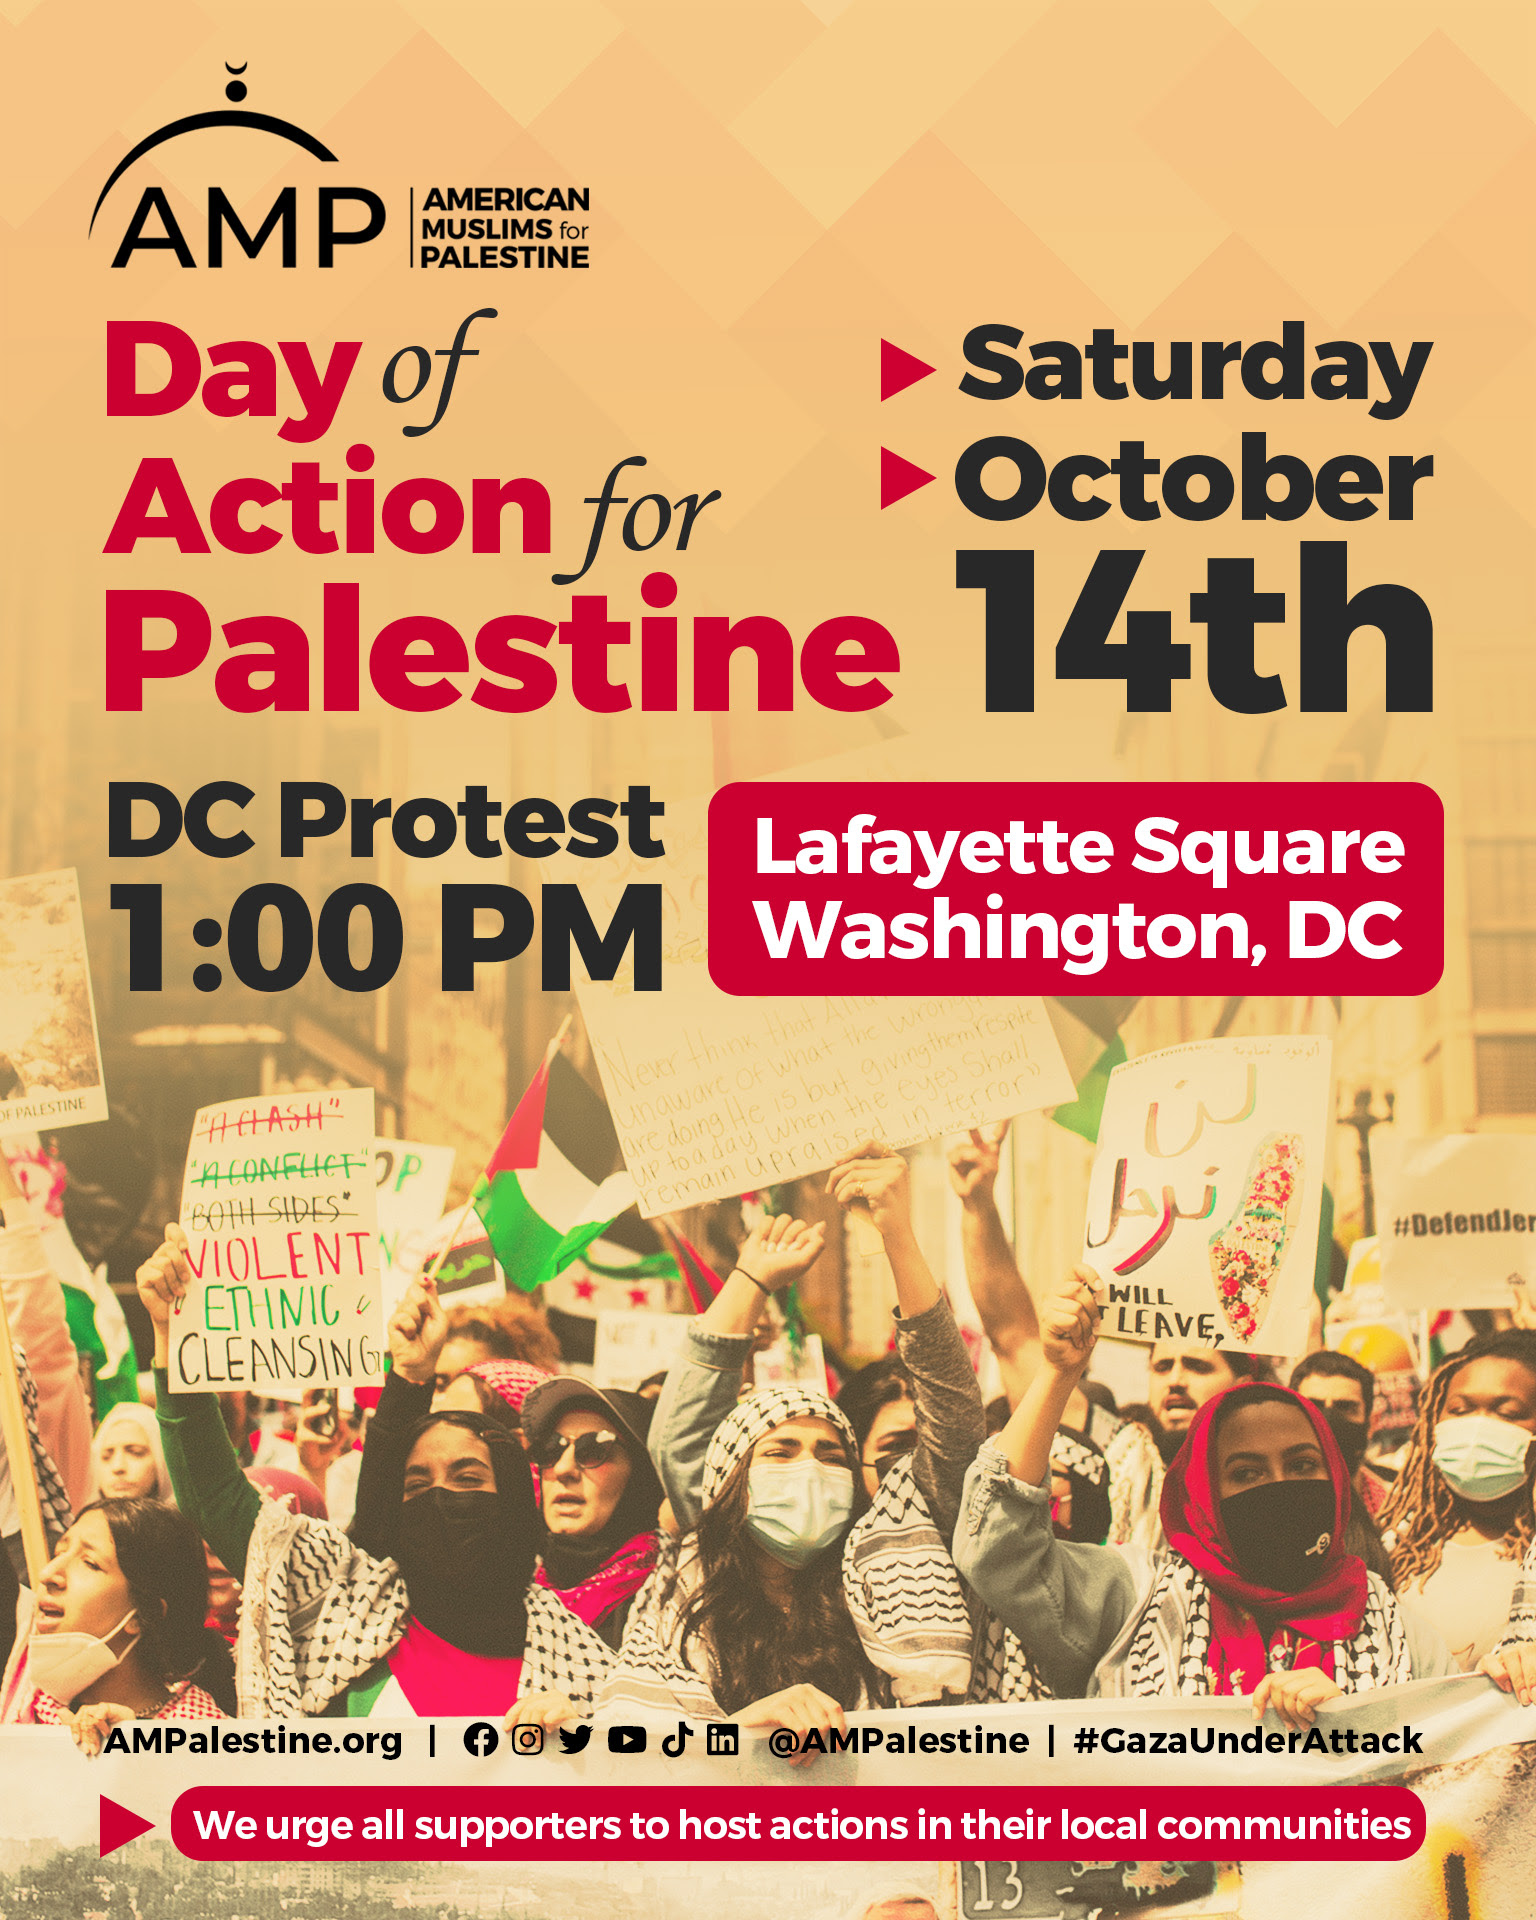 Day of Action for Palestine: DC Protest